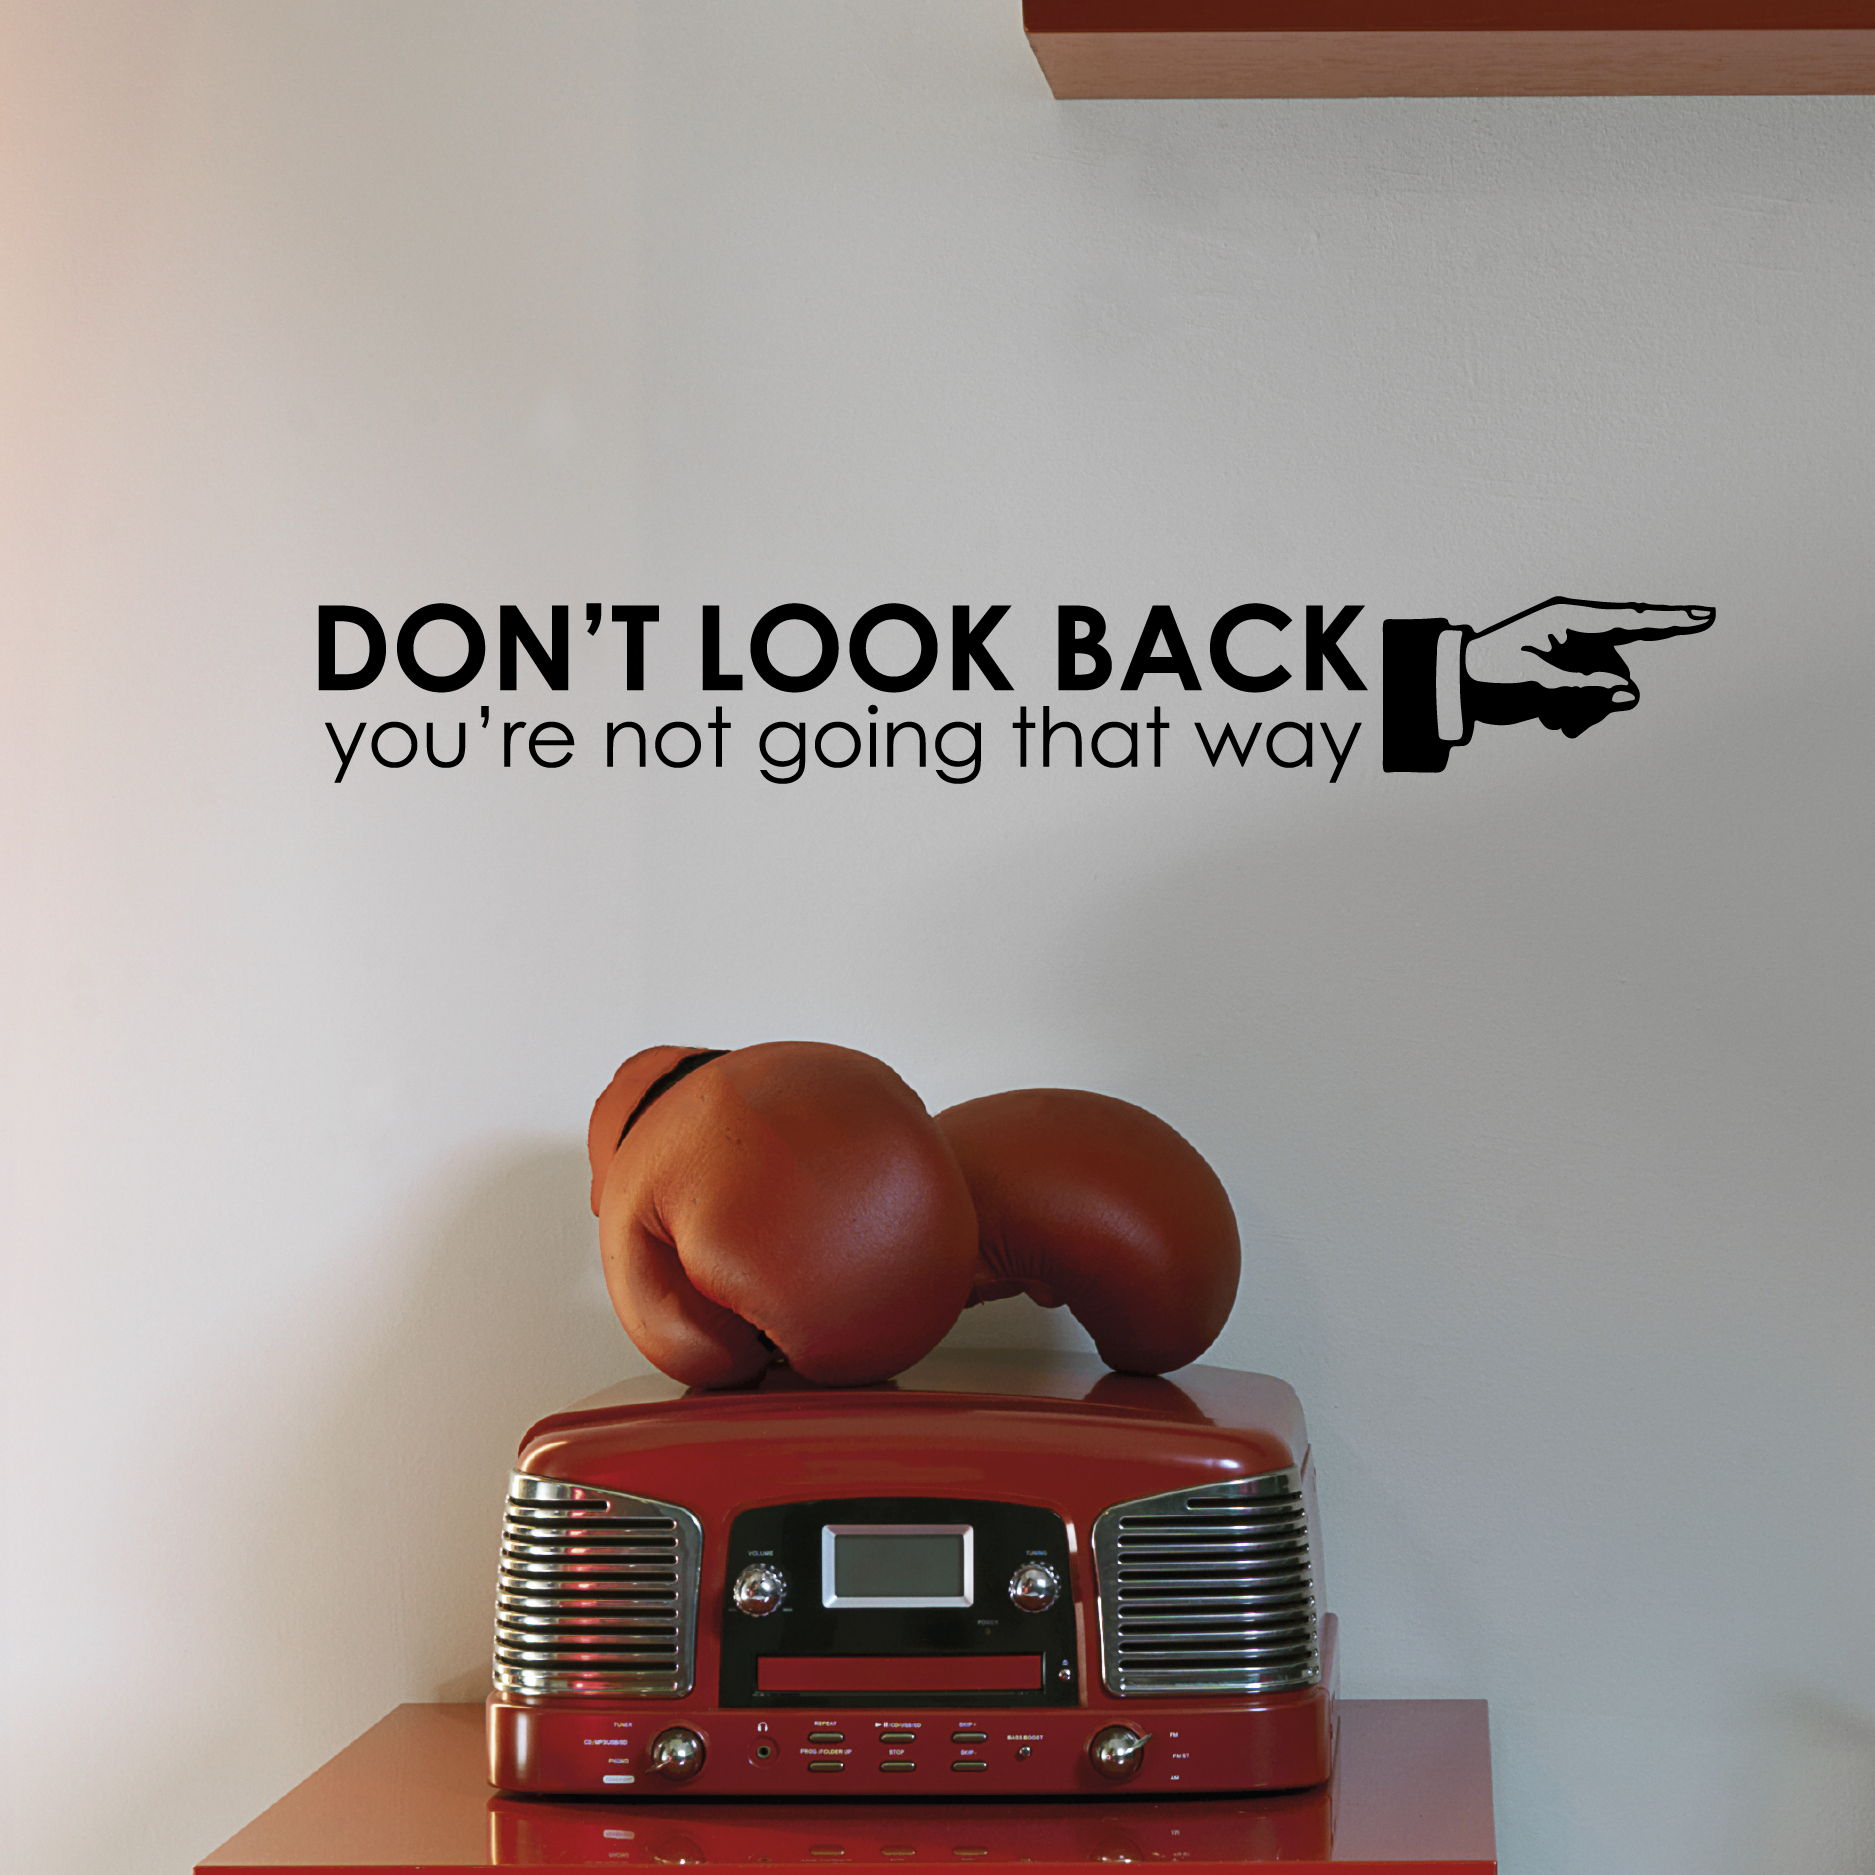 Dont back. Don t look. Don't look back игра. Streets - don't look back. Boston - don't look back.